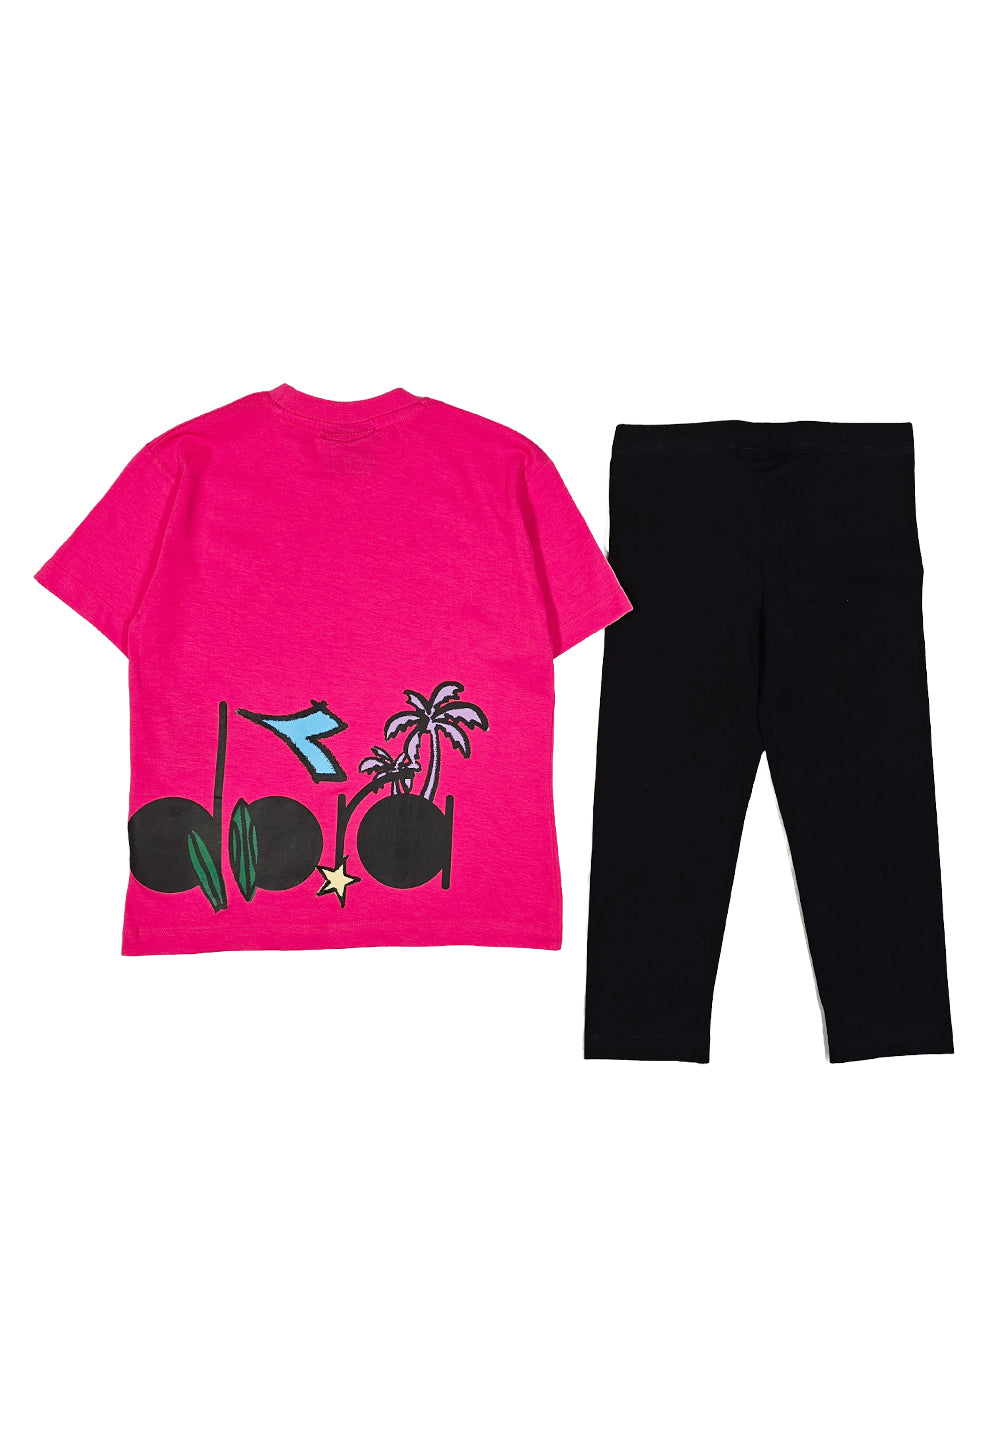 Fuchsia-black outfit for girls